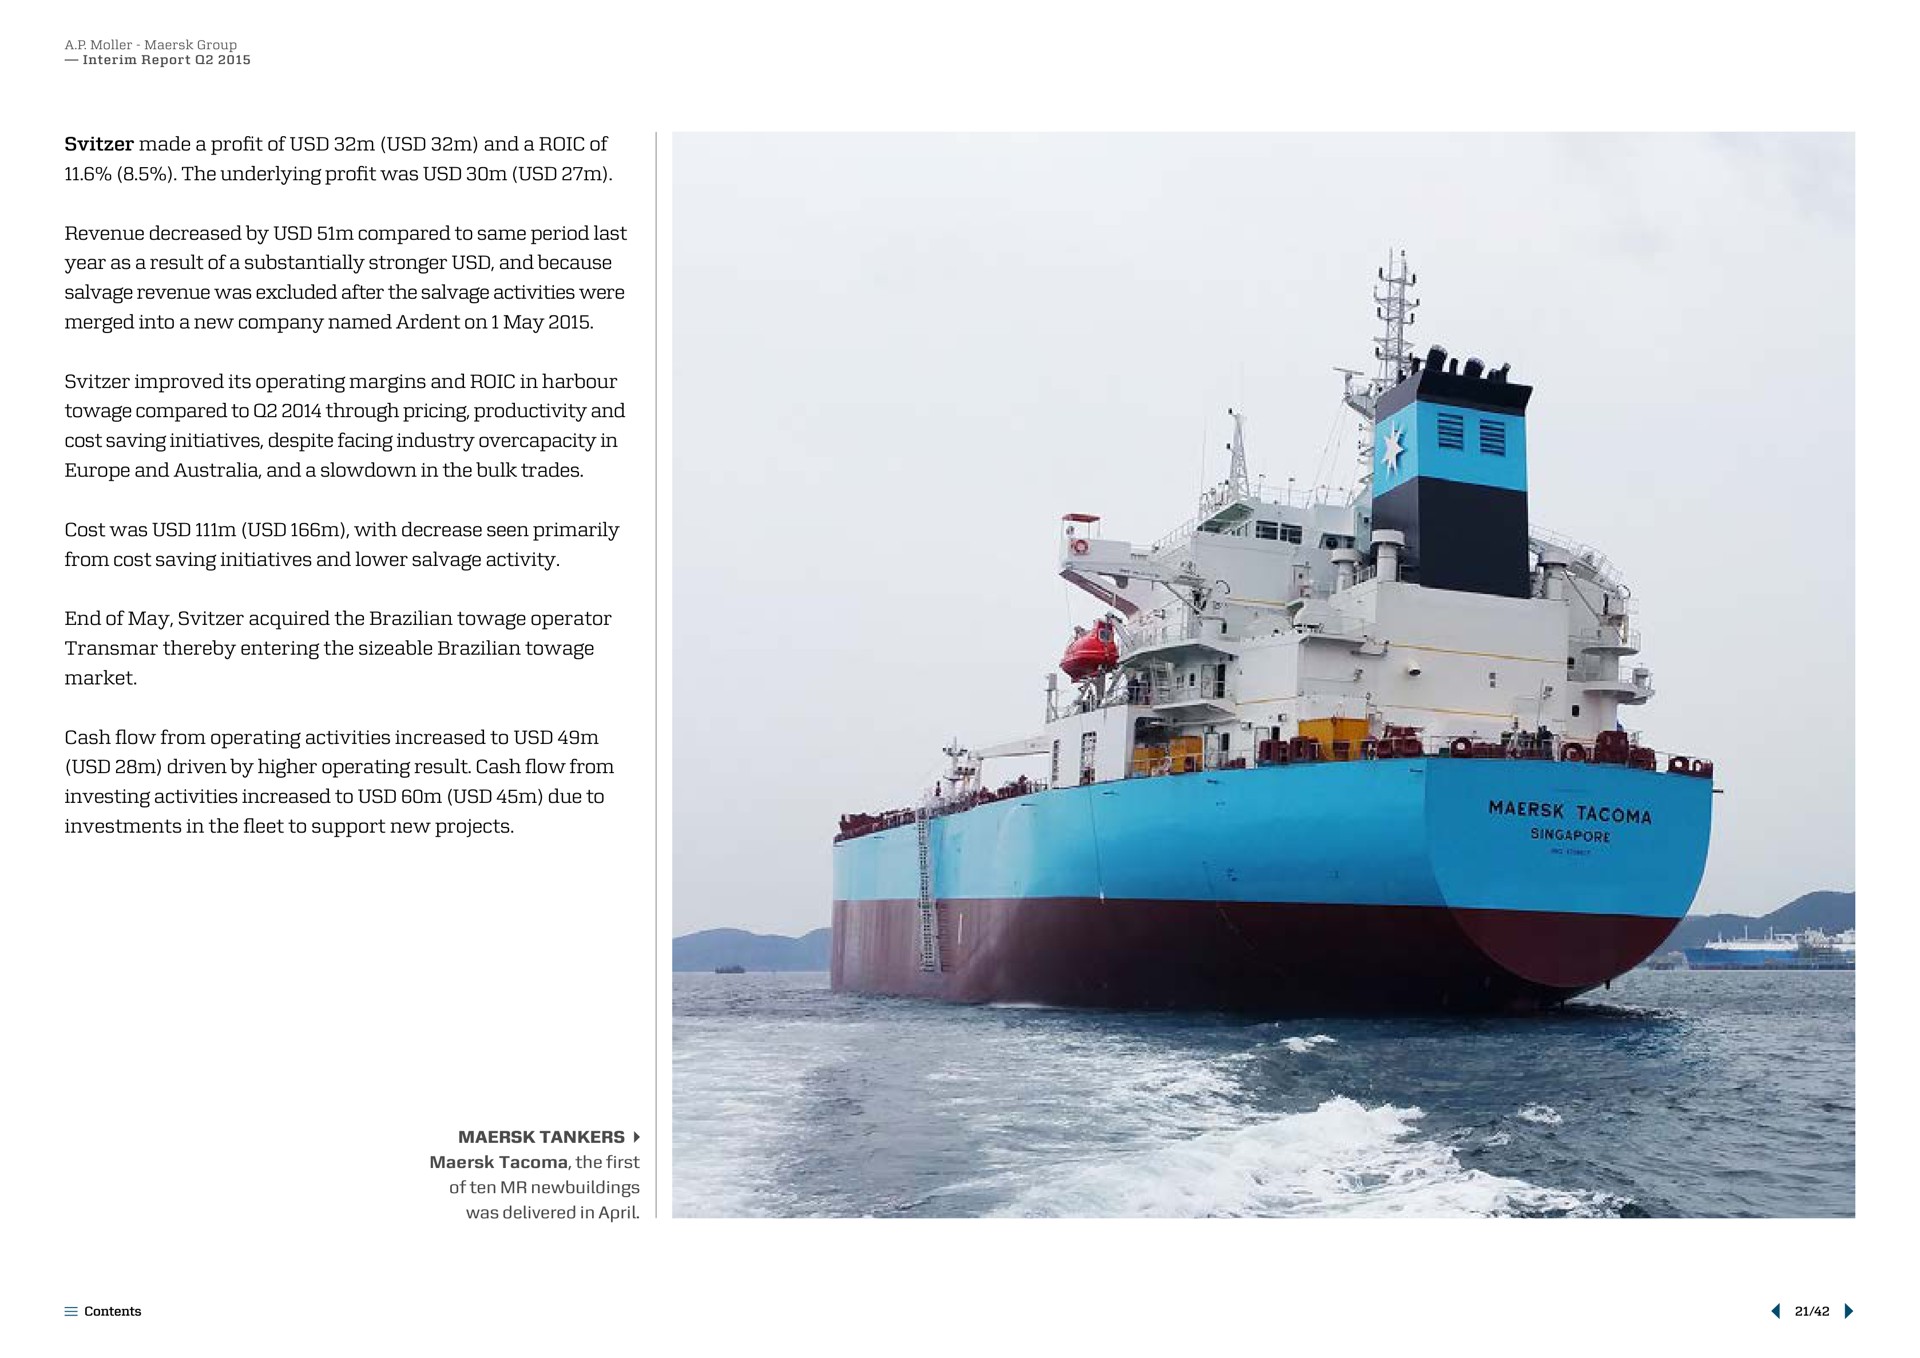 revenue decreased by compared to same period last year as a result of a substantially and because merged into anew company named towage compared to through pricing productivity and and and a slowdown in from cost saving initiatives and lower salvage activity end of may acquired the towage operator driven by higher operating result cash flow from | Maersk